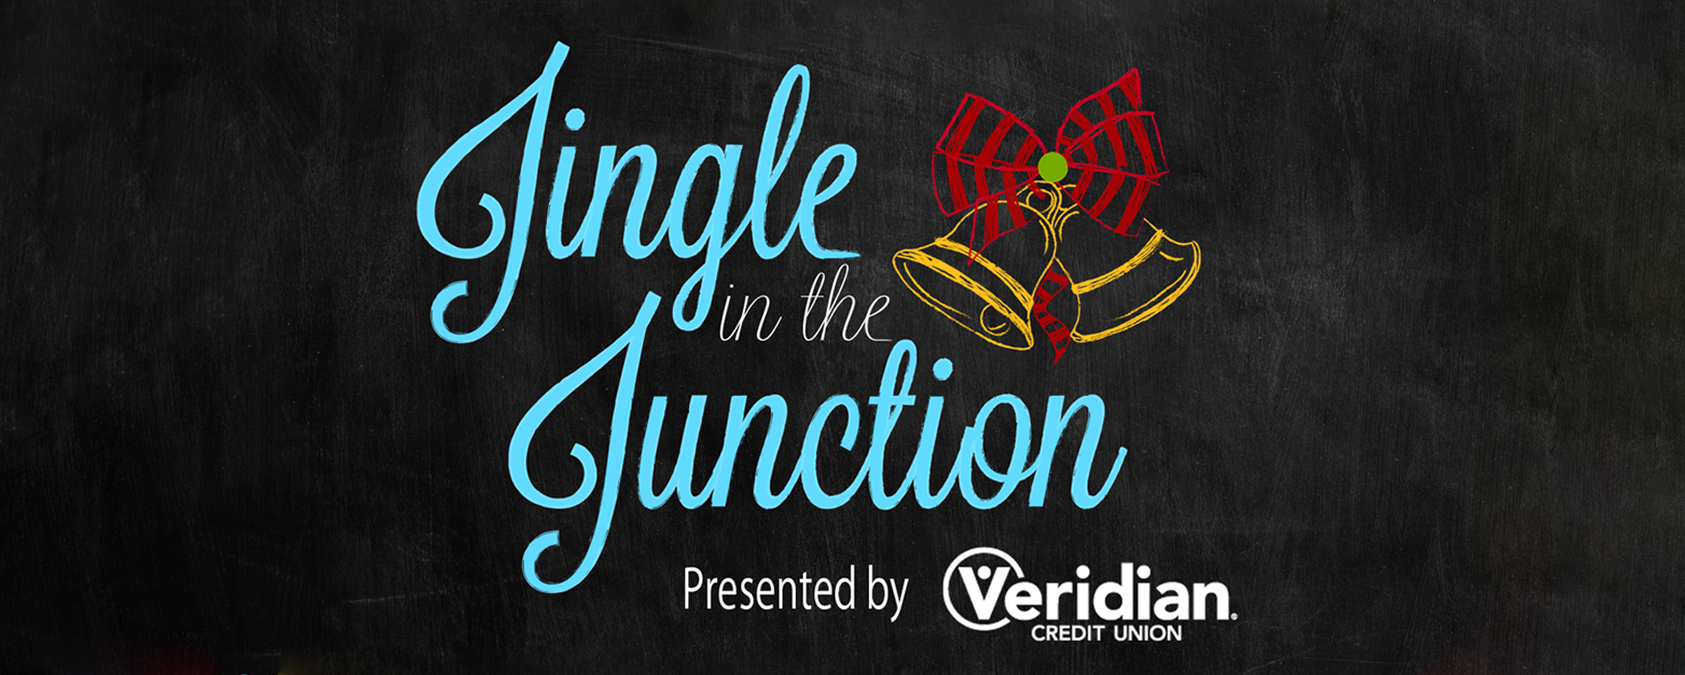 Jingle in the Junction